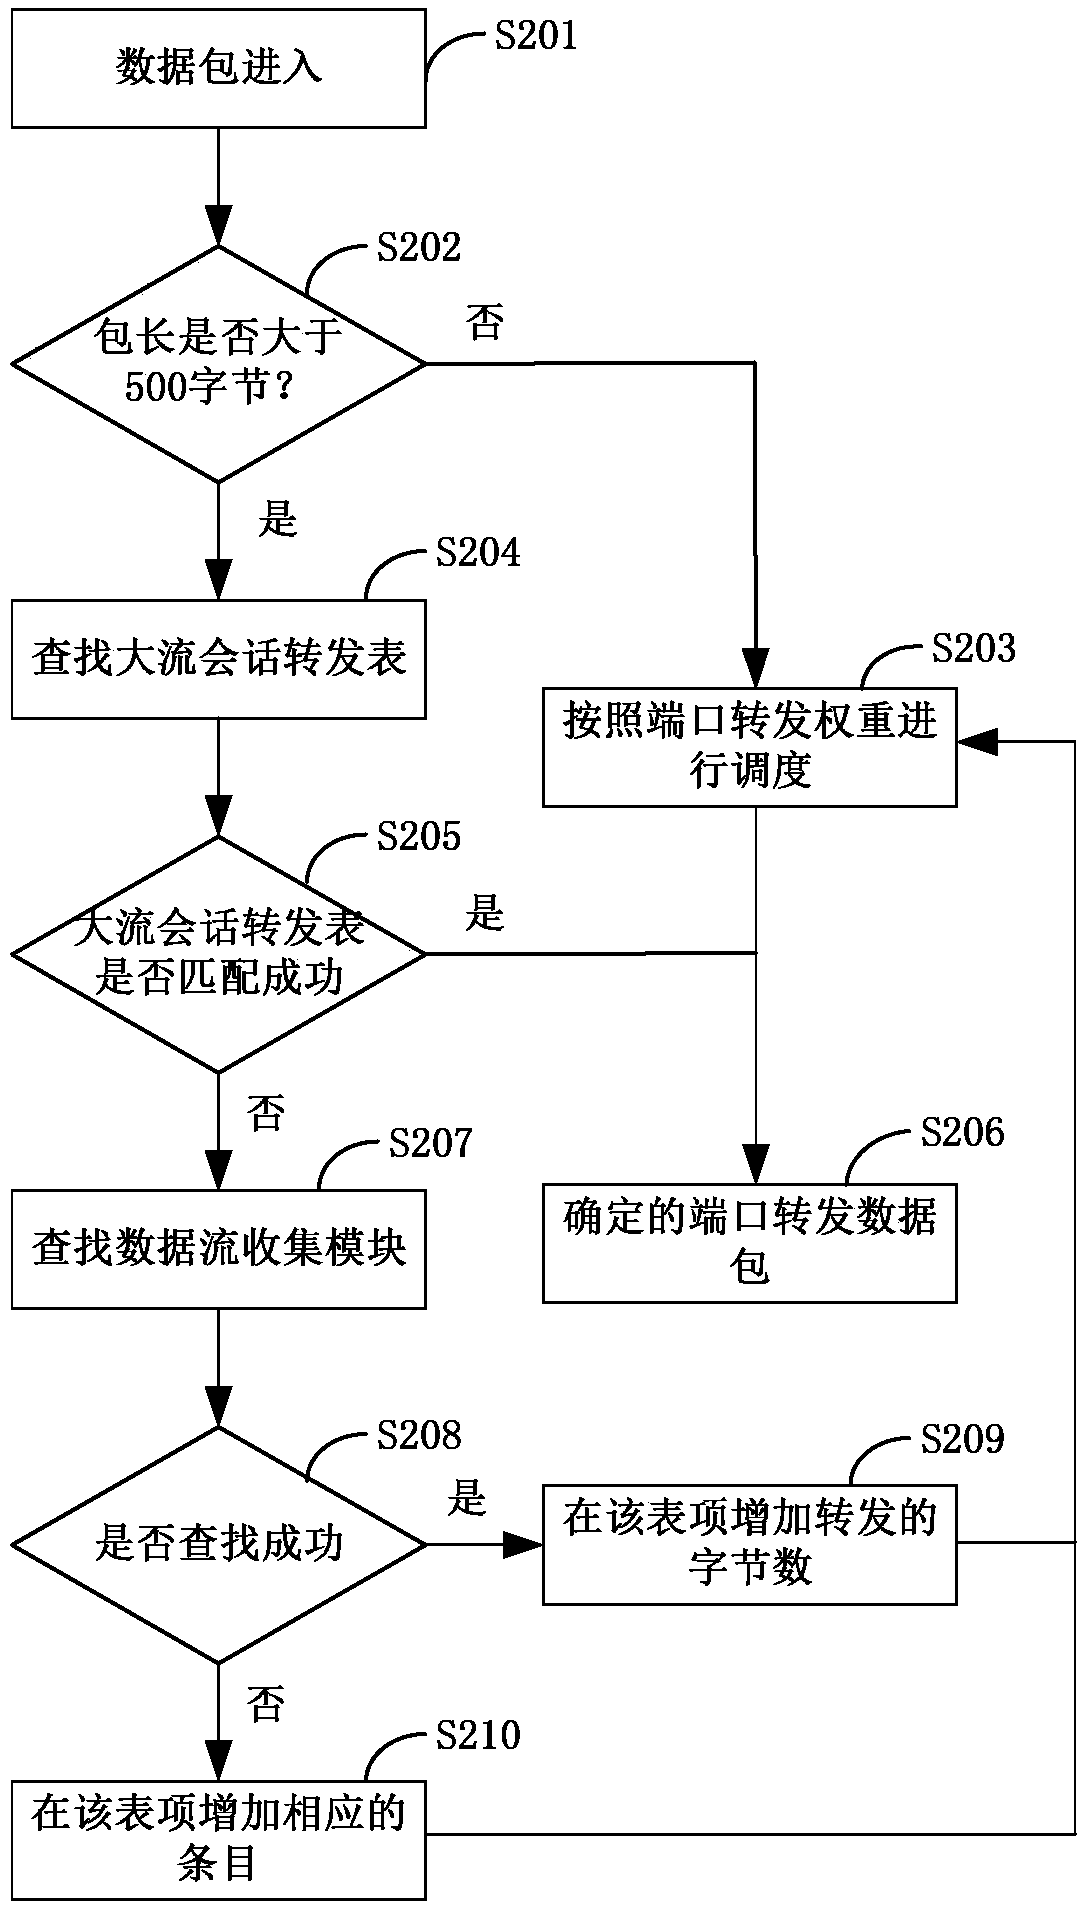 Load sharing method and system of link aggregation